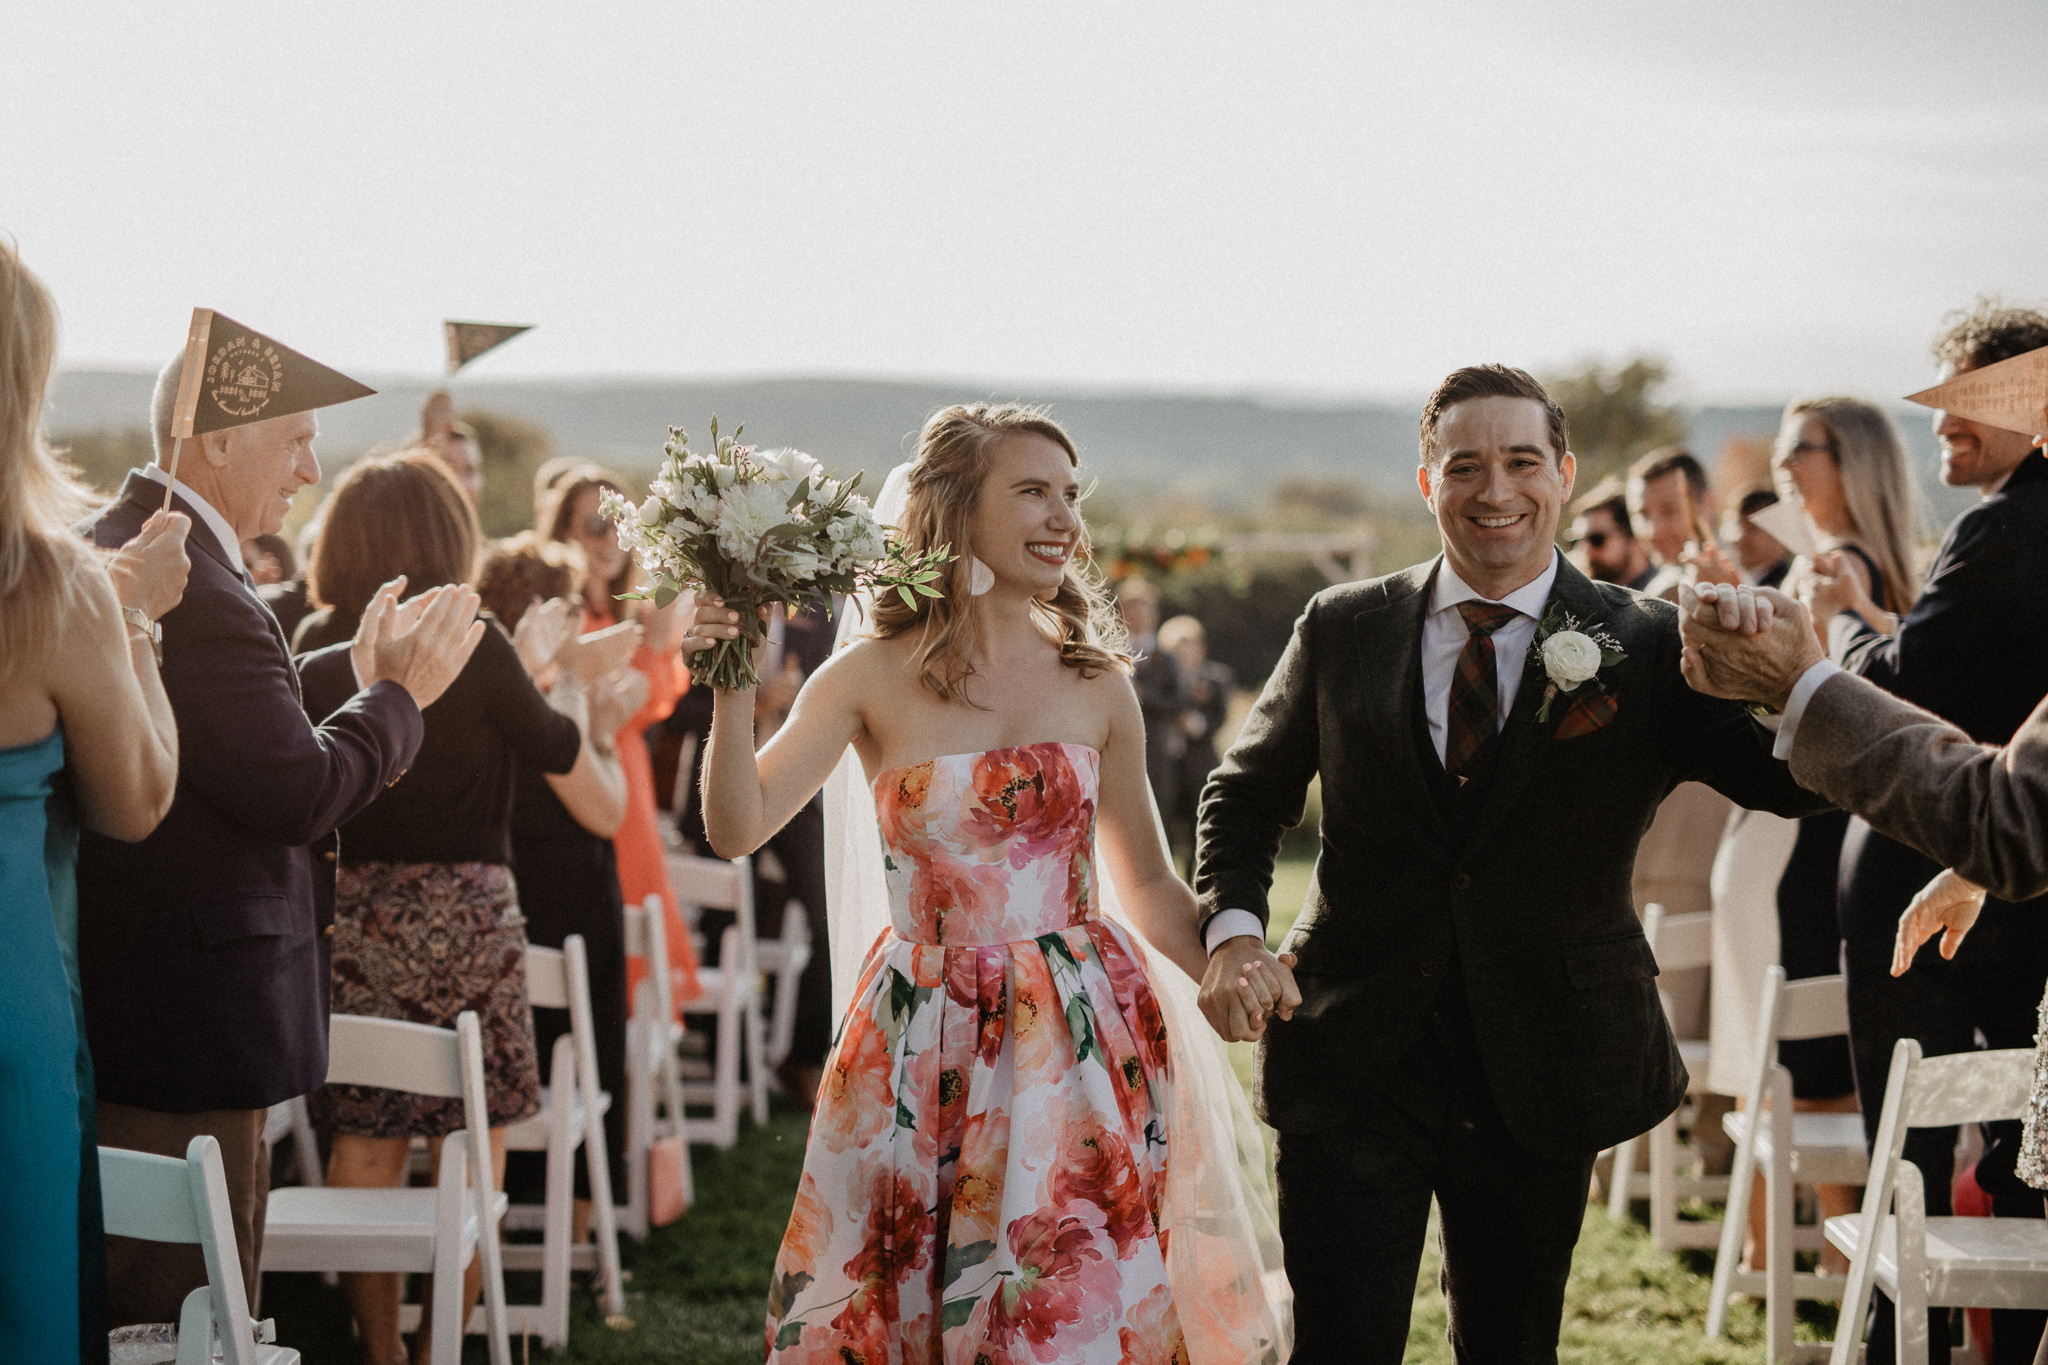 couple exiting outdoor wedding ceremony with bride in colorful wedding dress